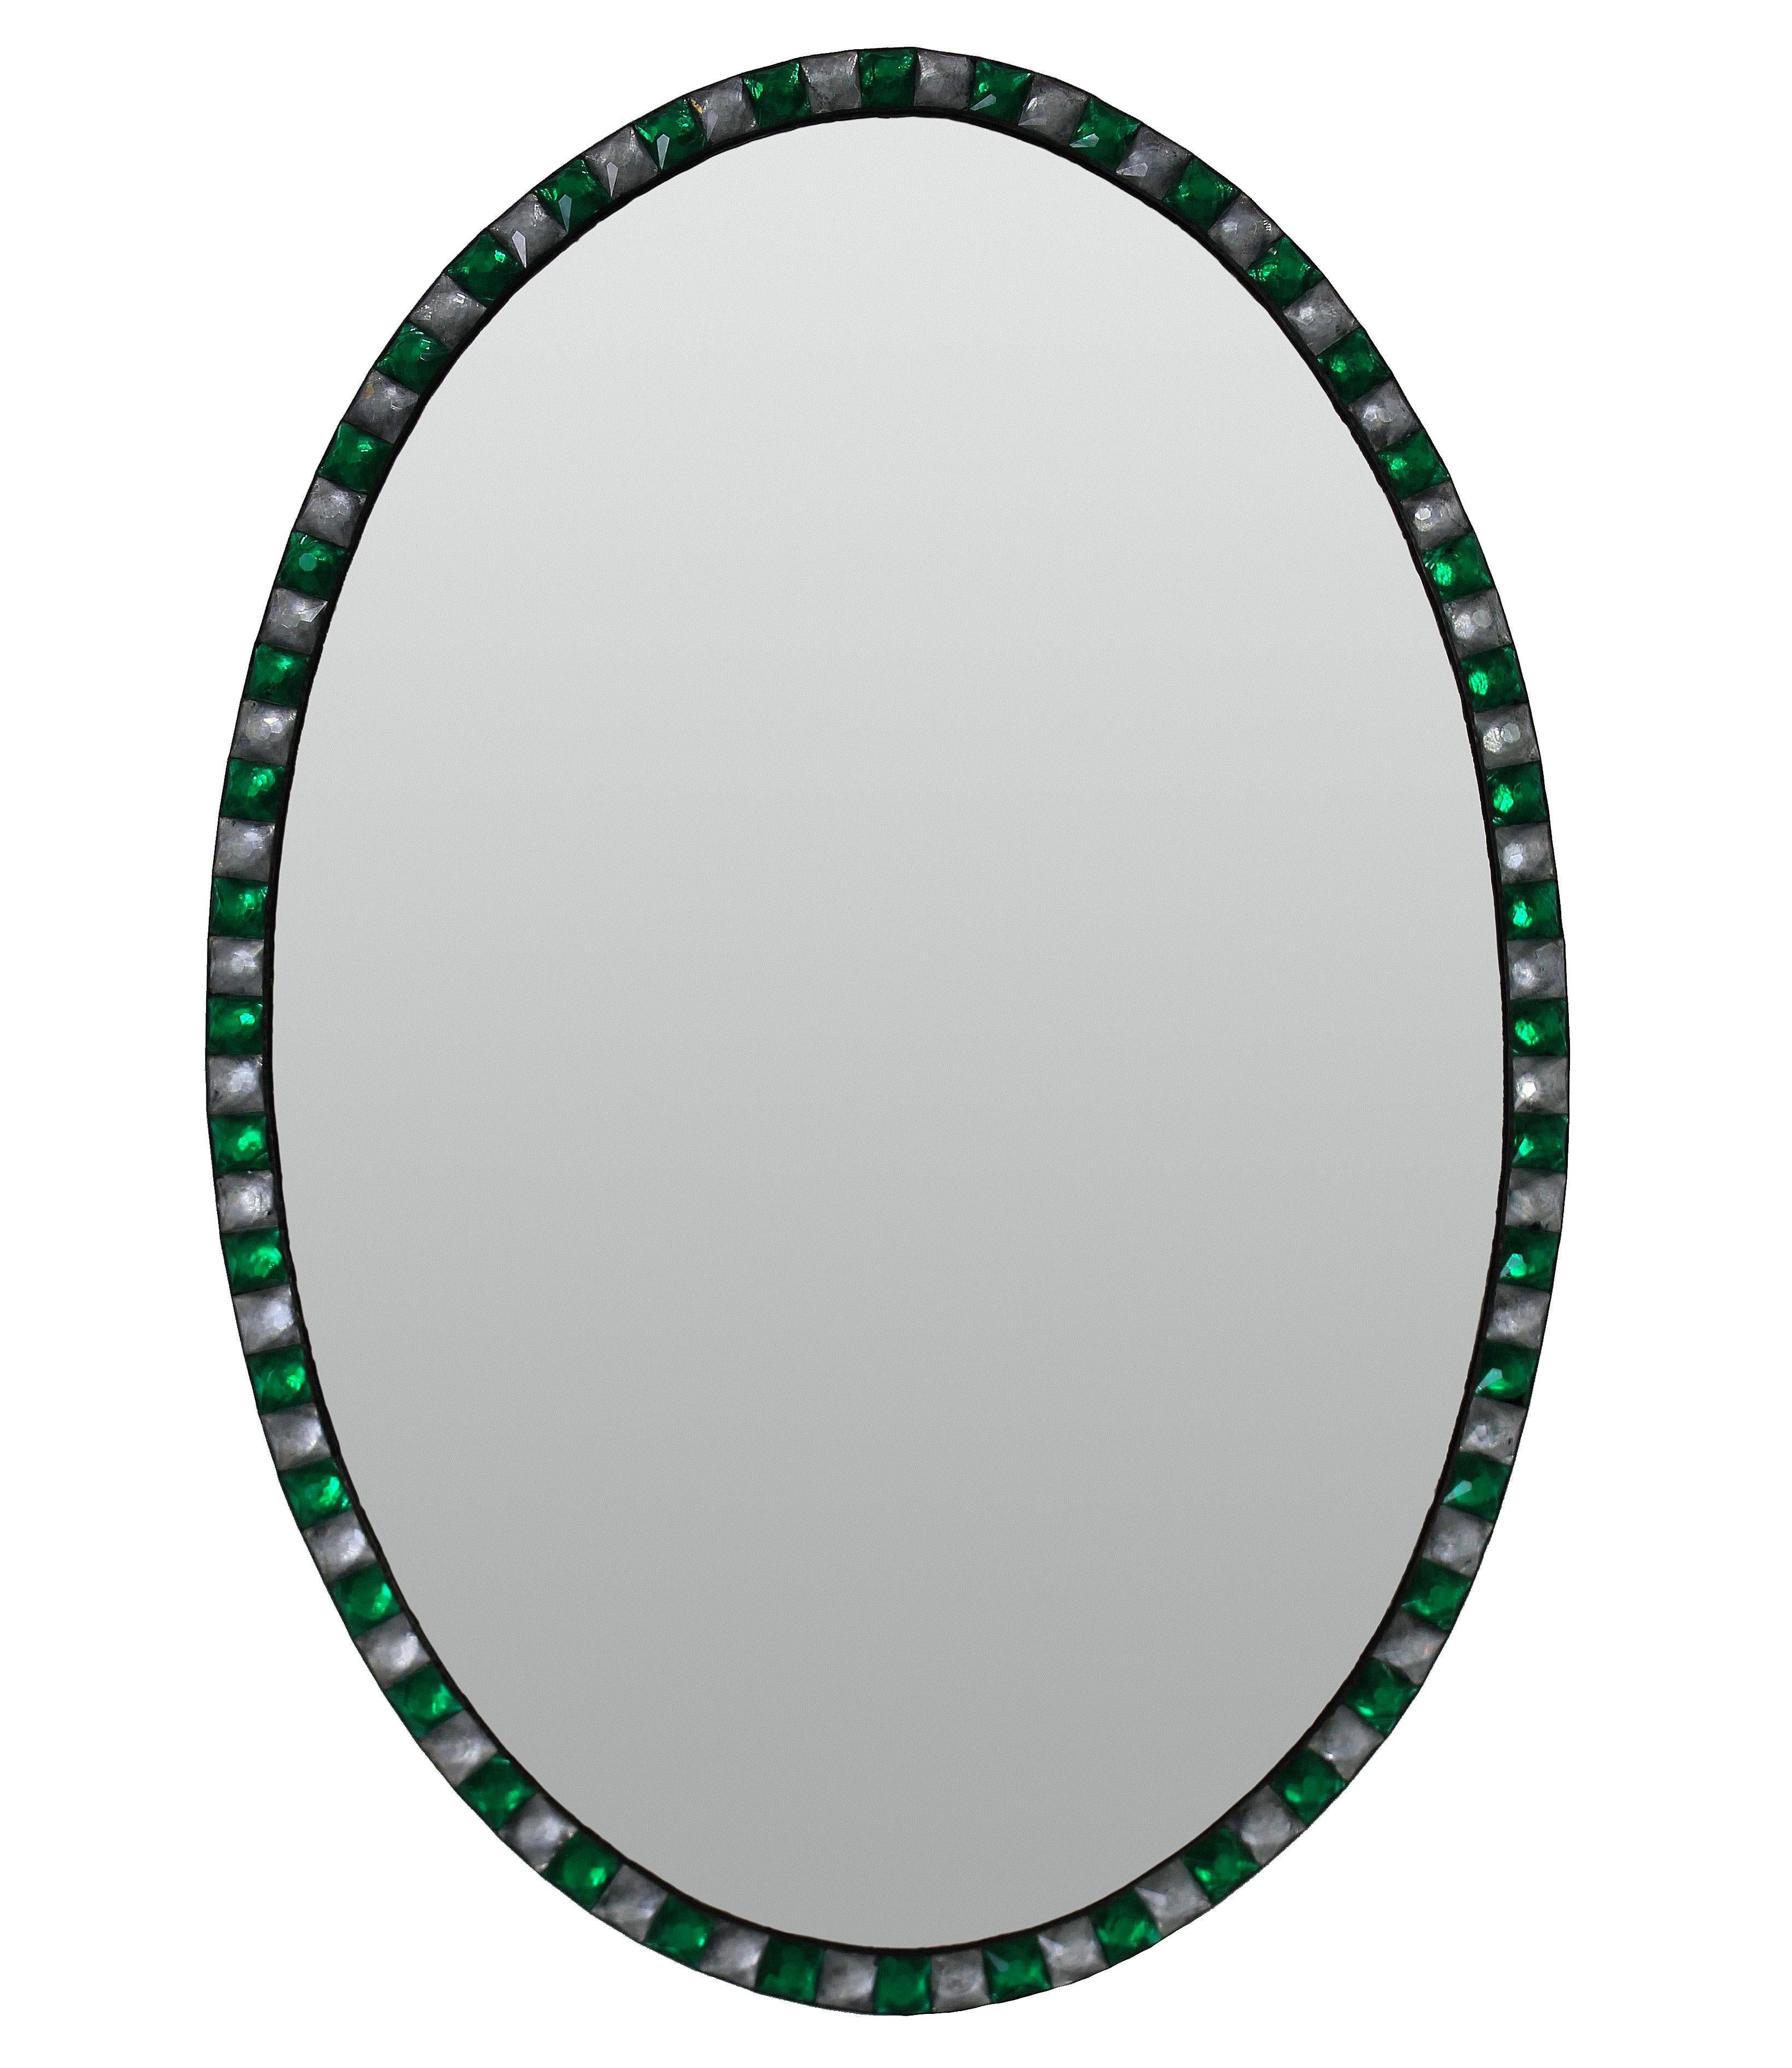 Late 20th Century Georgian Style Irish Mirrors with Emerald Glass and Rock Crystal Faceted Border